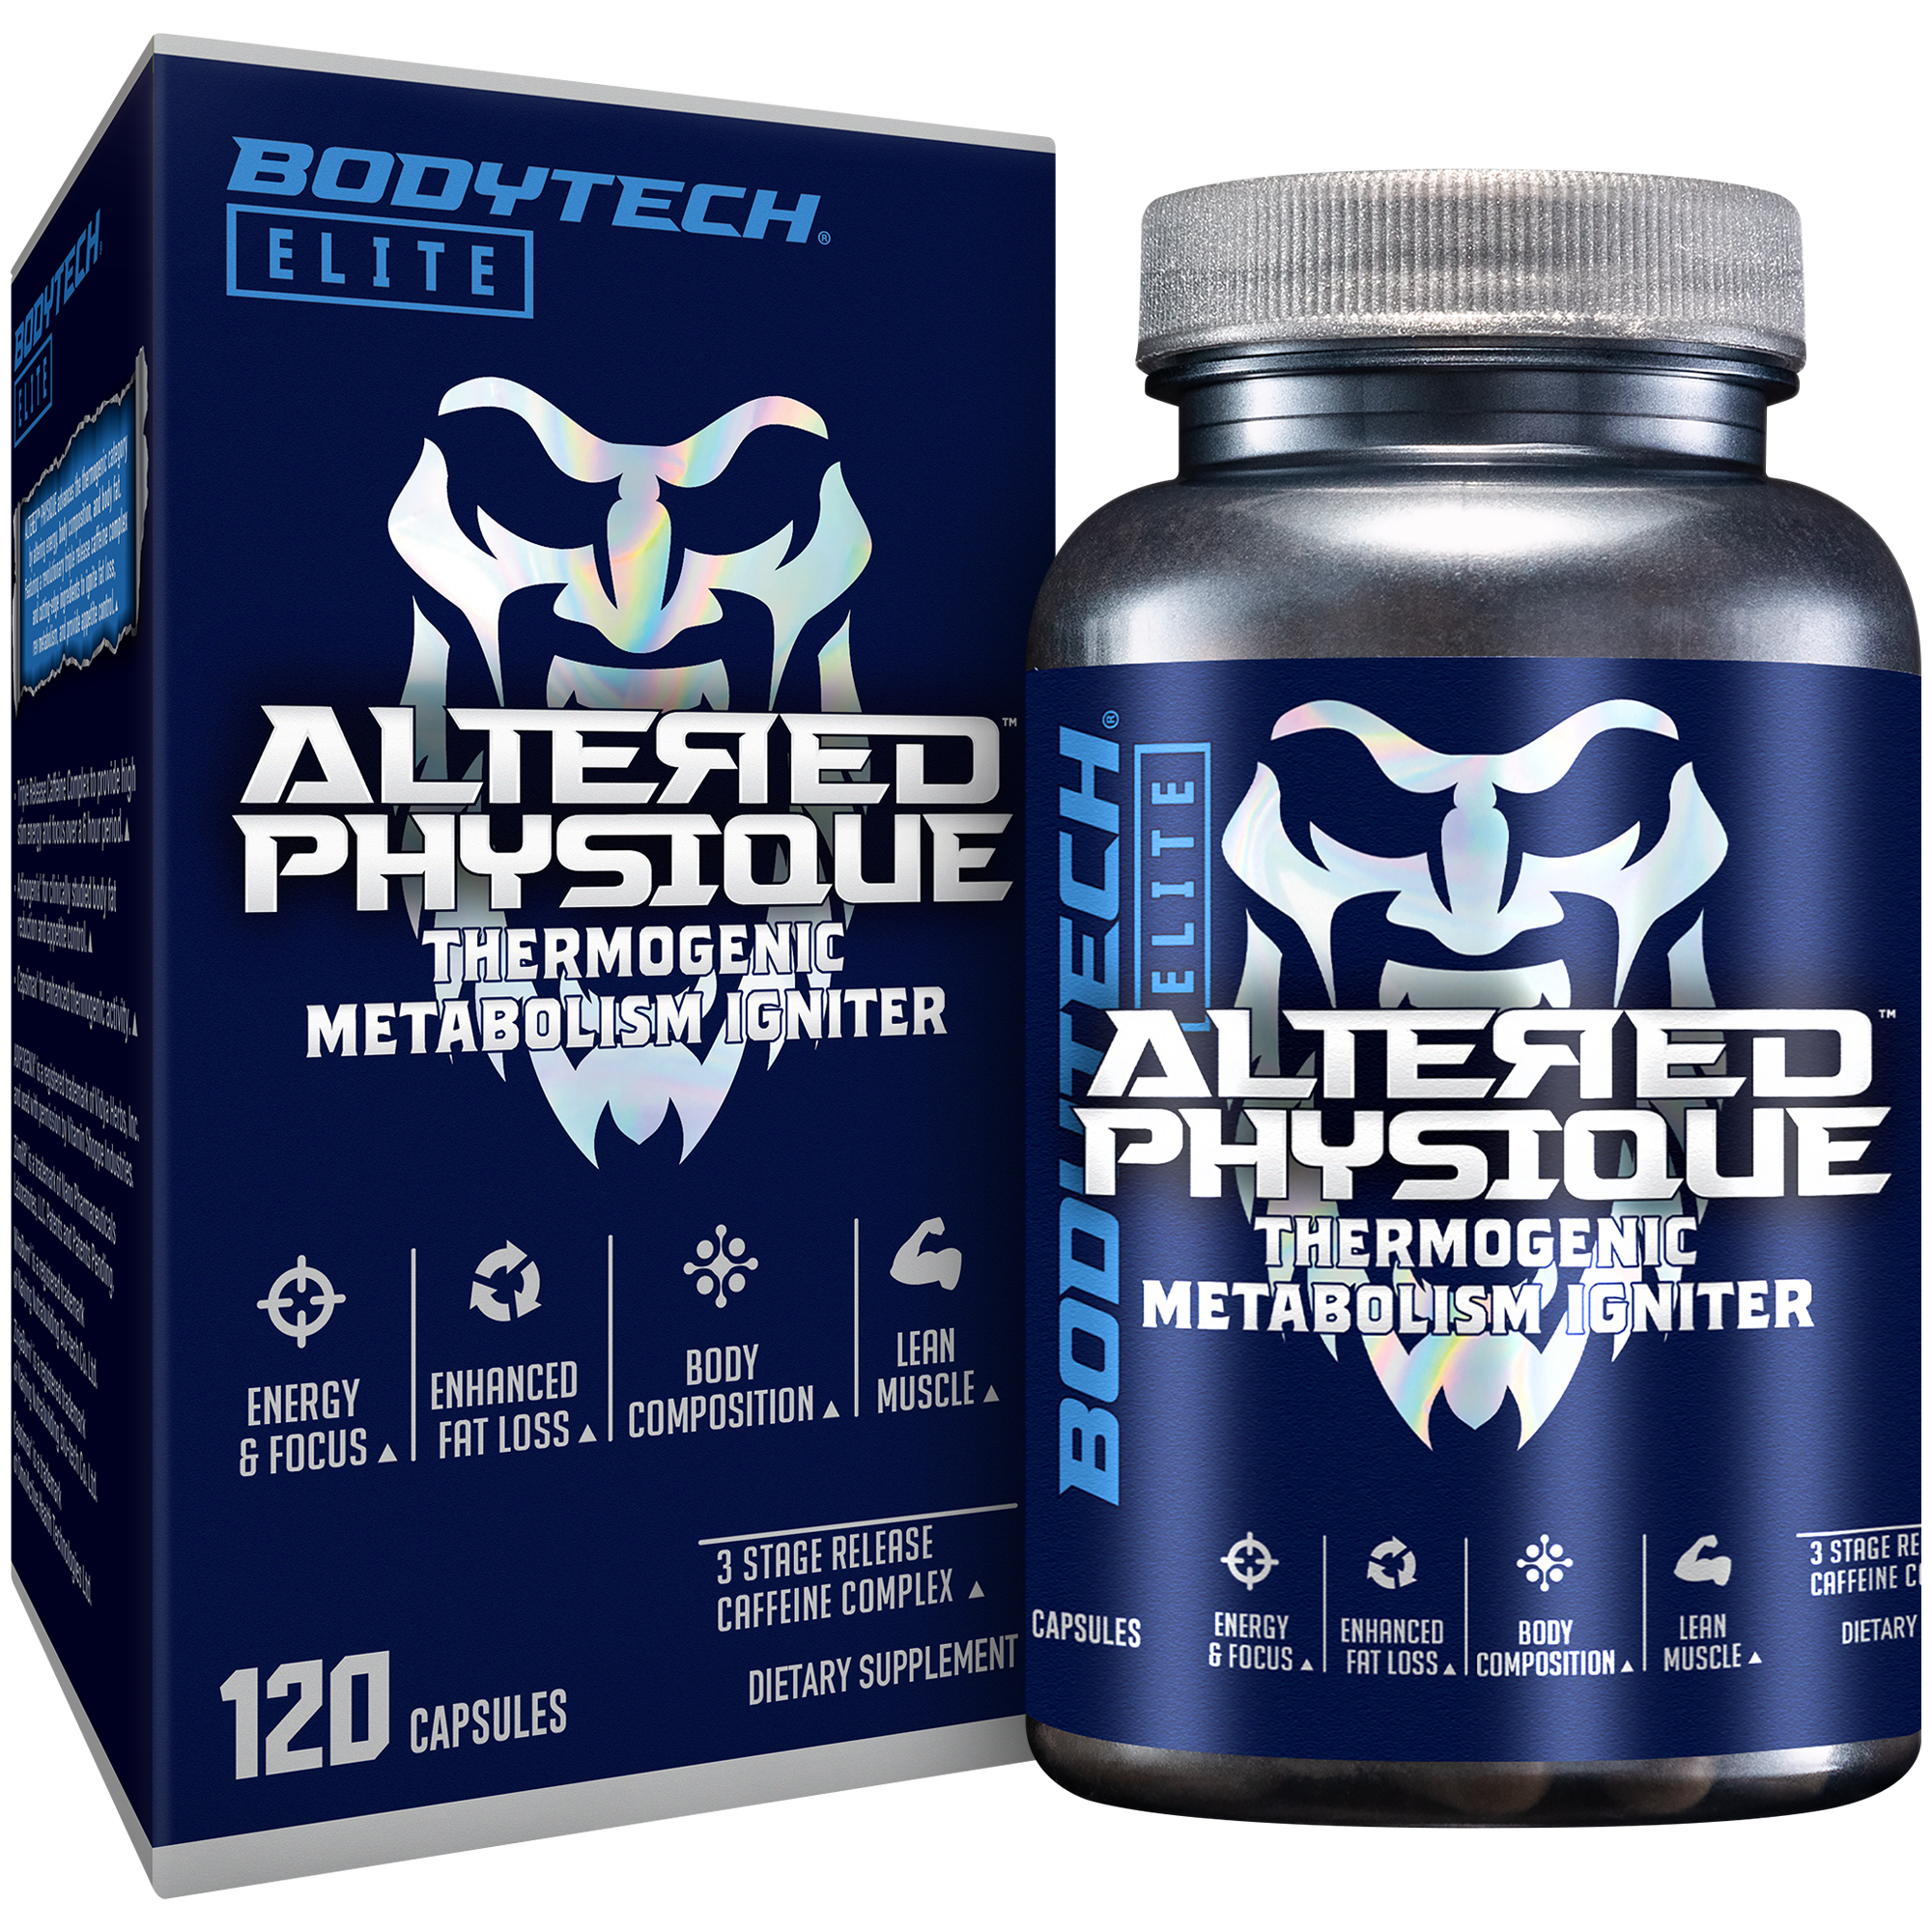 BodyTech Elite Altered Phyisque Box and Bottle